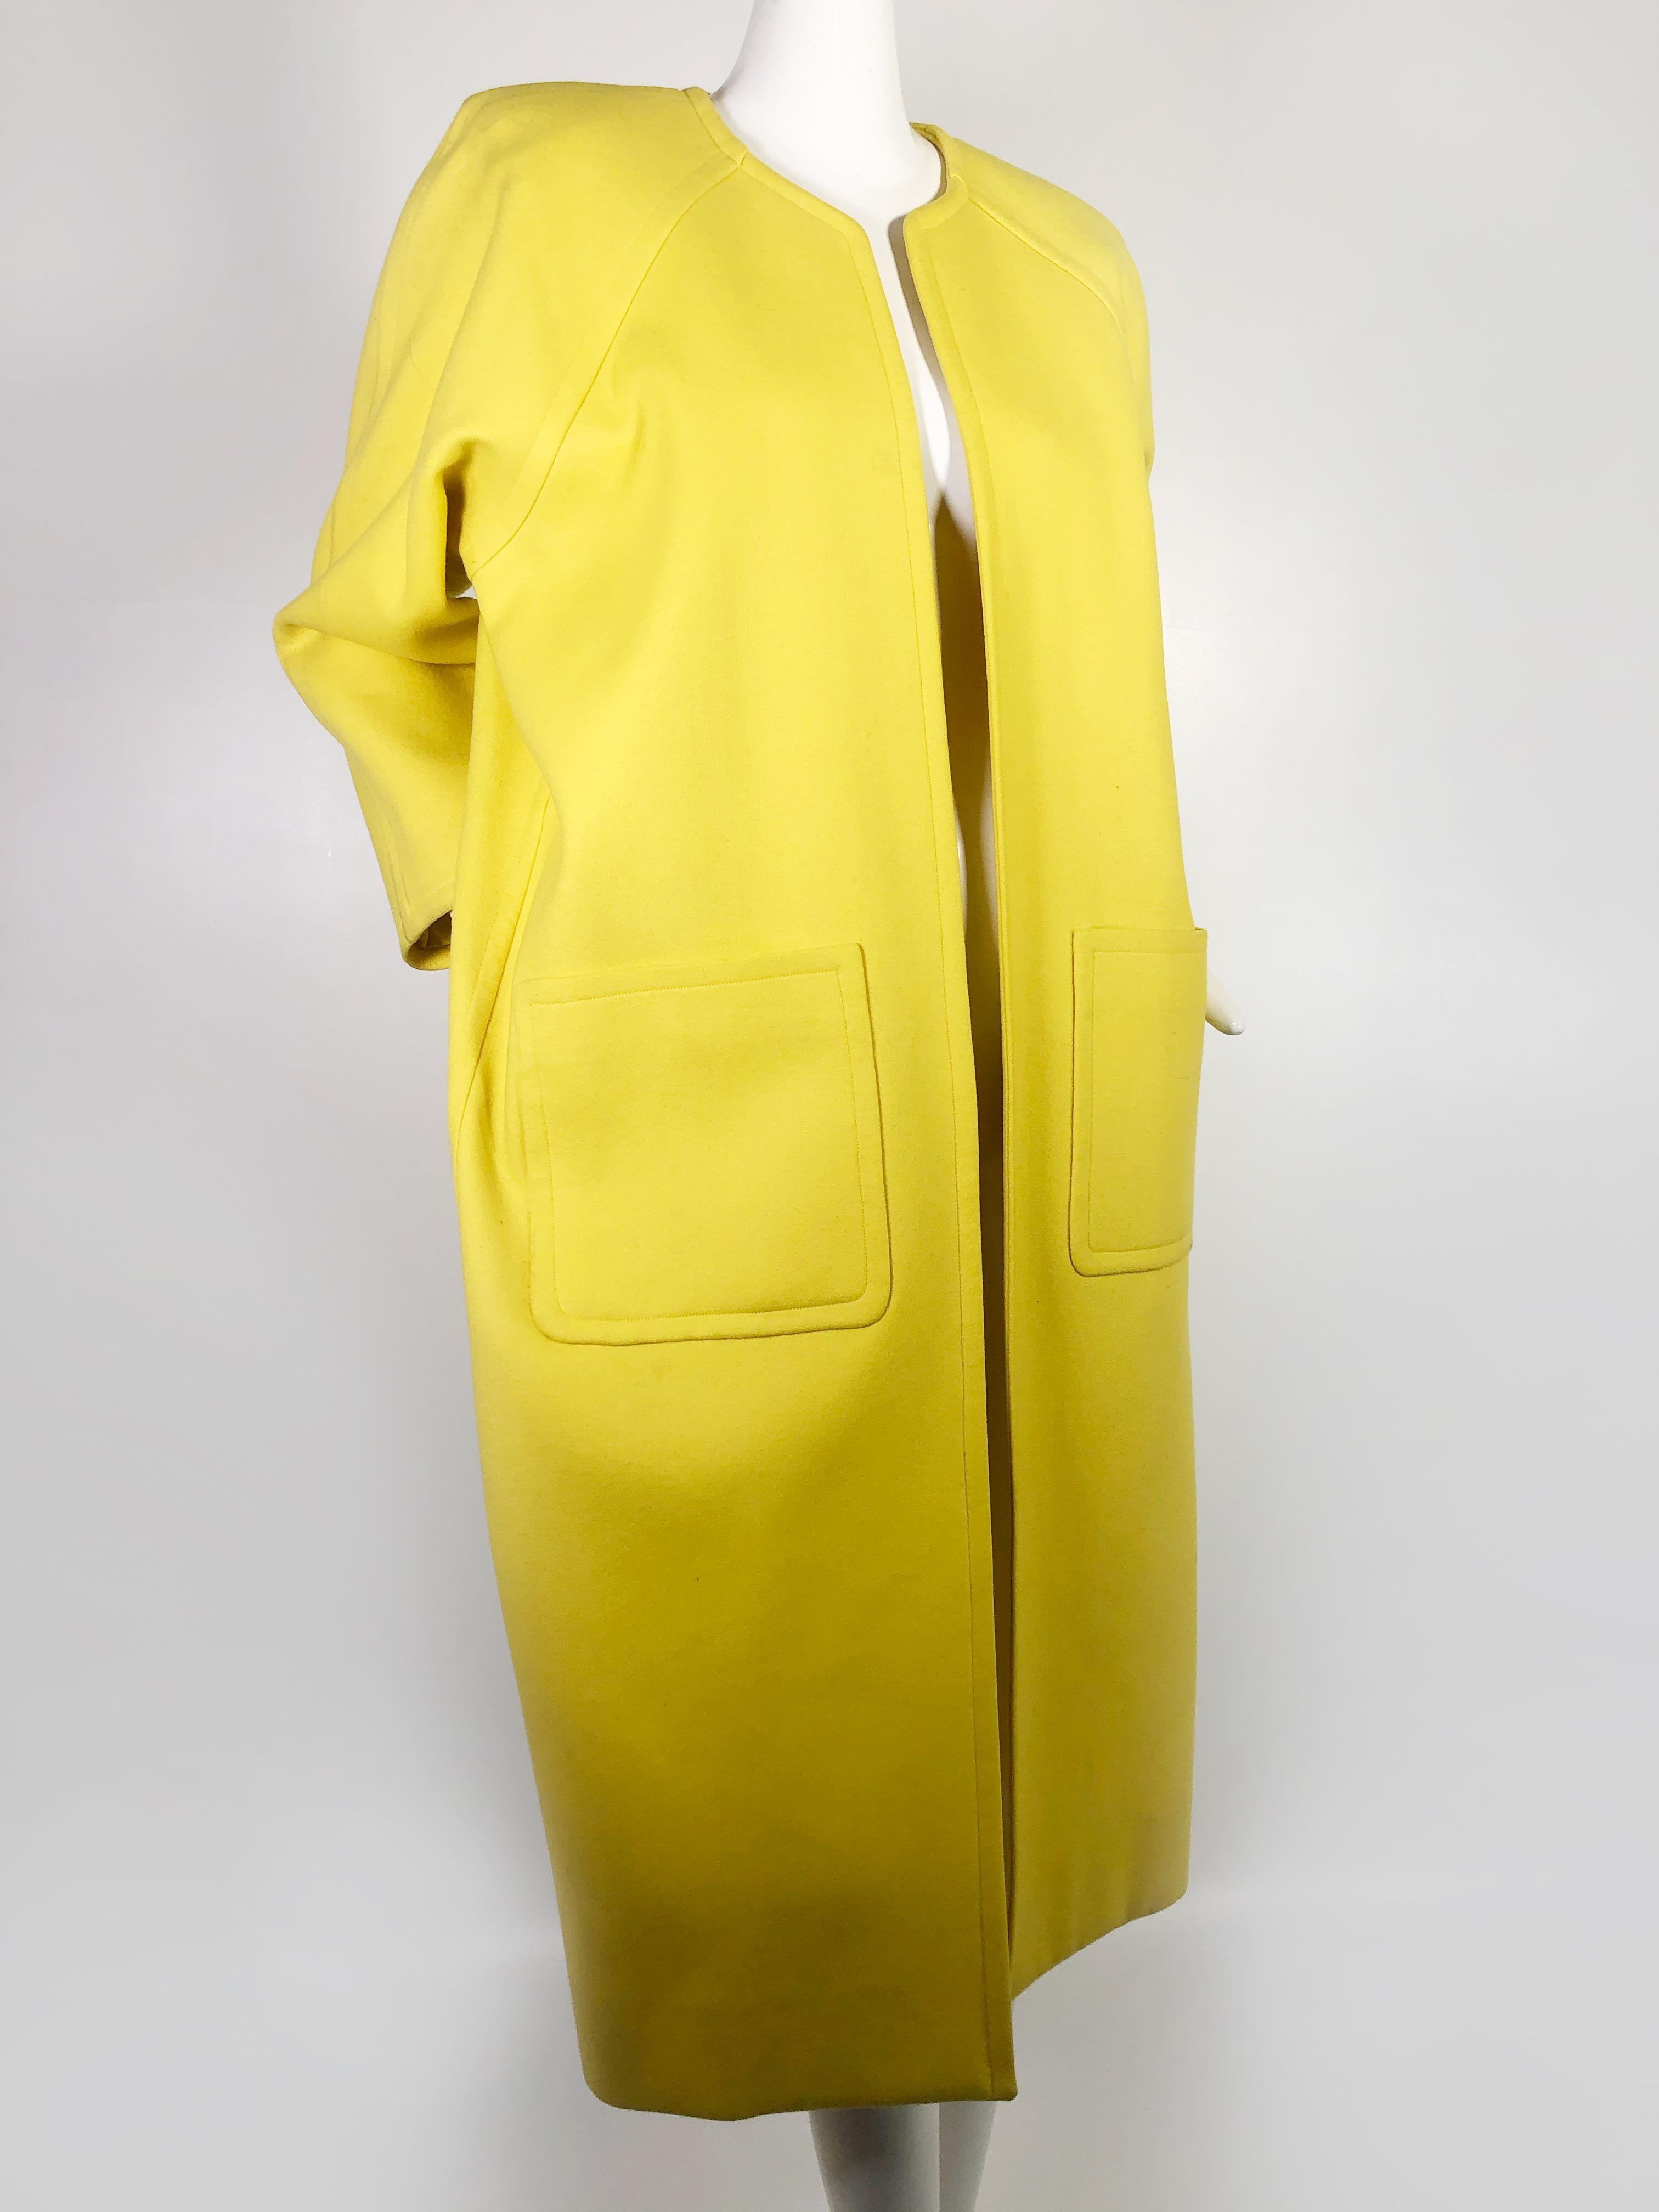 1980s Canary Yellow Wool Coat with Deep Hip Pockets and Raglan Sleeves 1